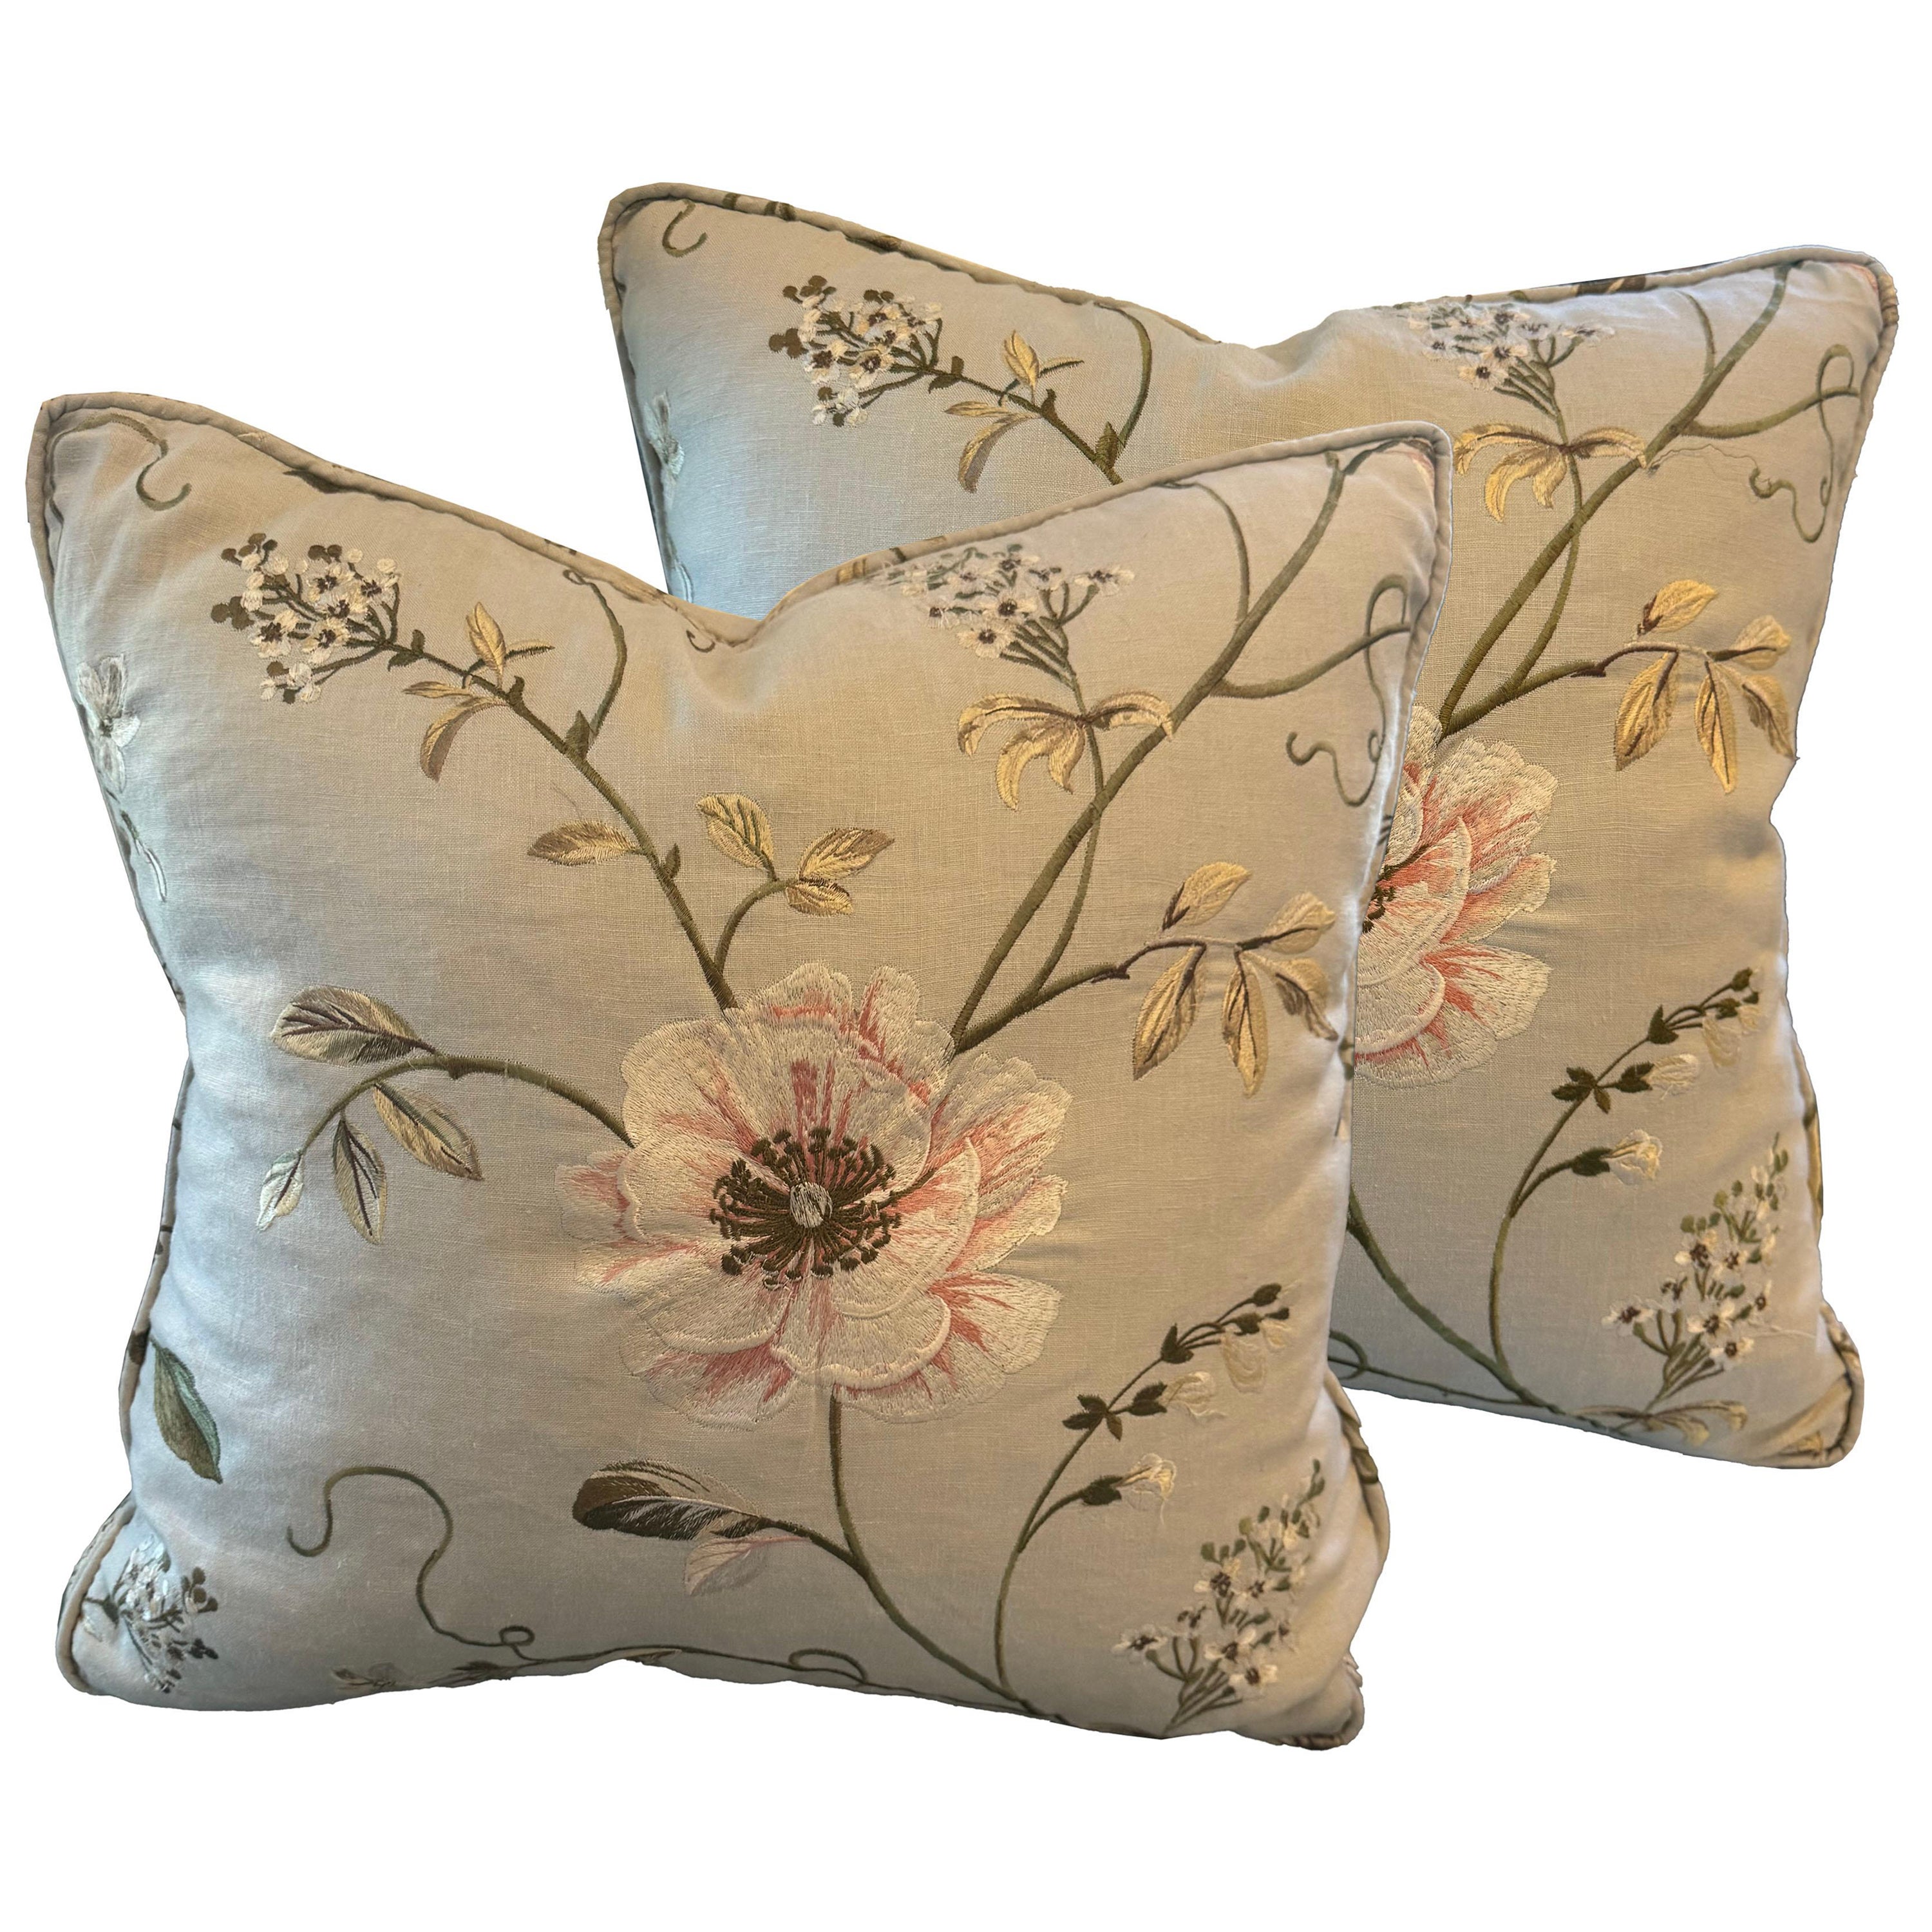 Pair of Crewel Work Embroidered Pillows  For Sale